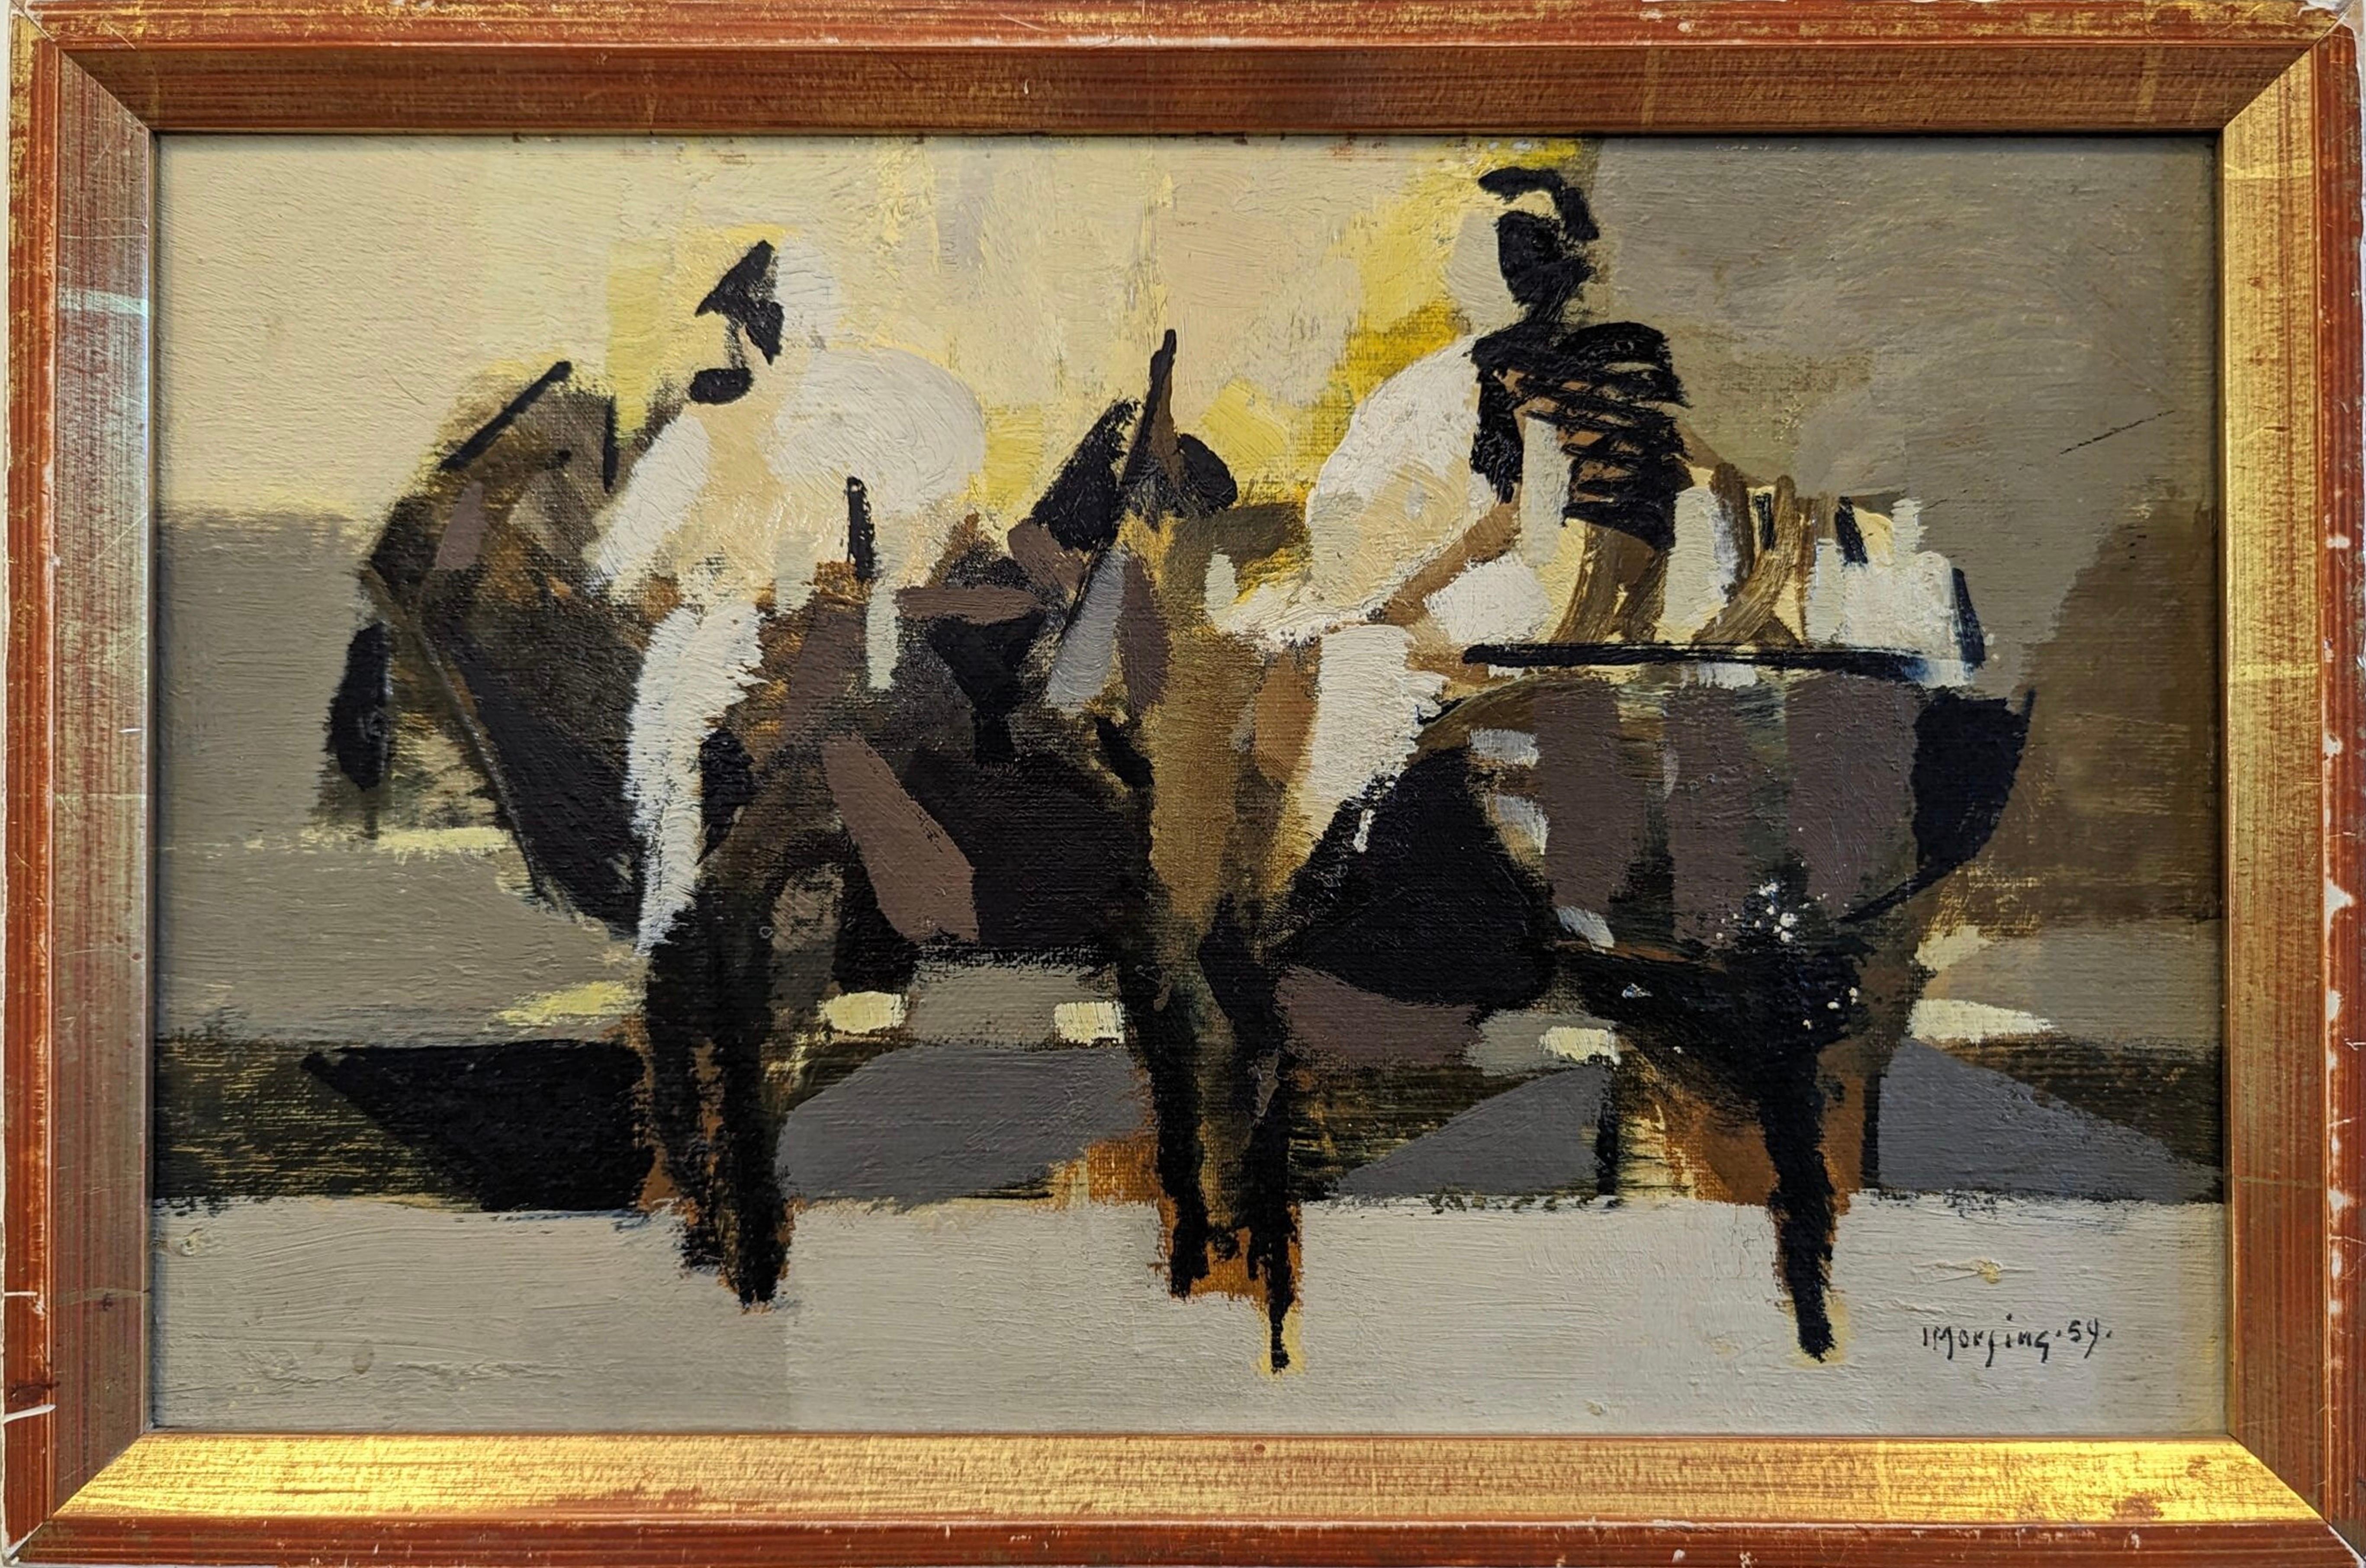 ALTEA
Size: 25 x 38 cm (including frame)
Oil on Board

A brilliantly executed semi-abstract mid-century modernist oil composition, painted in 1959 by the established Swedish artist Ivar Morsing (1919-2009), whose works have been exhibited in public